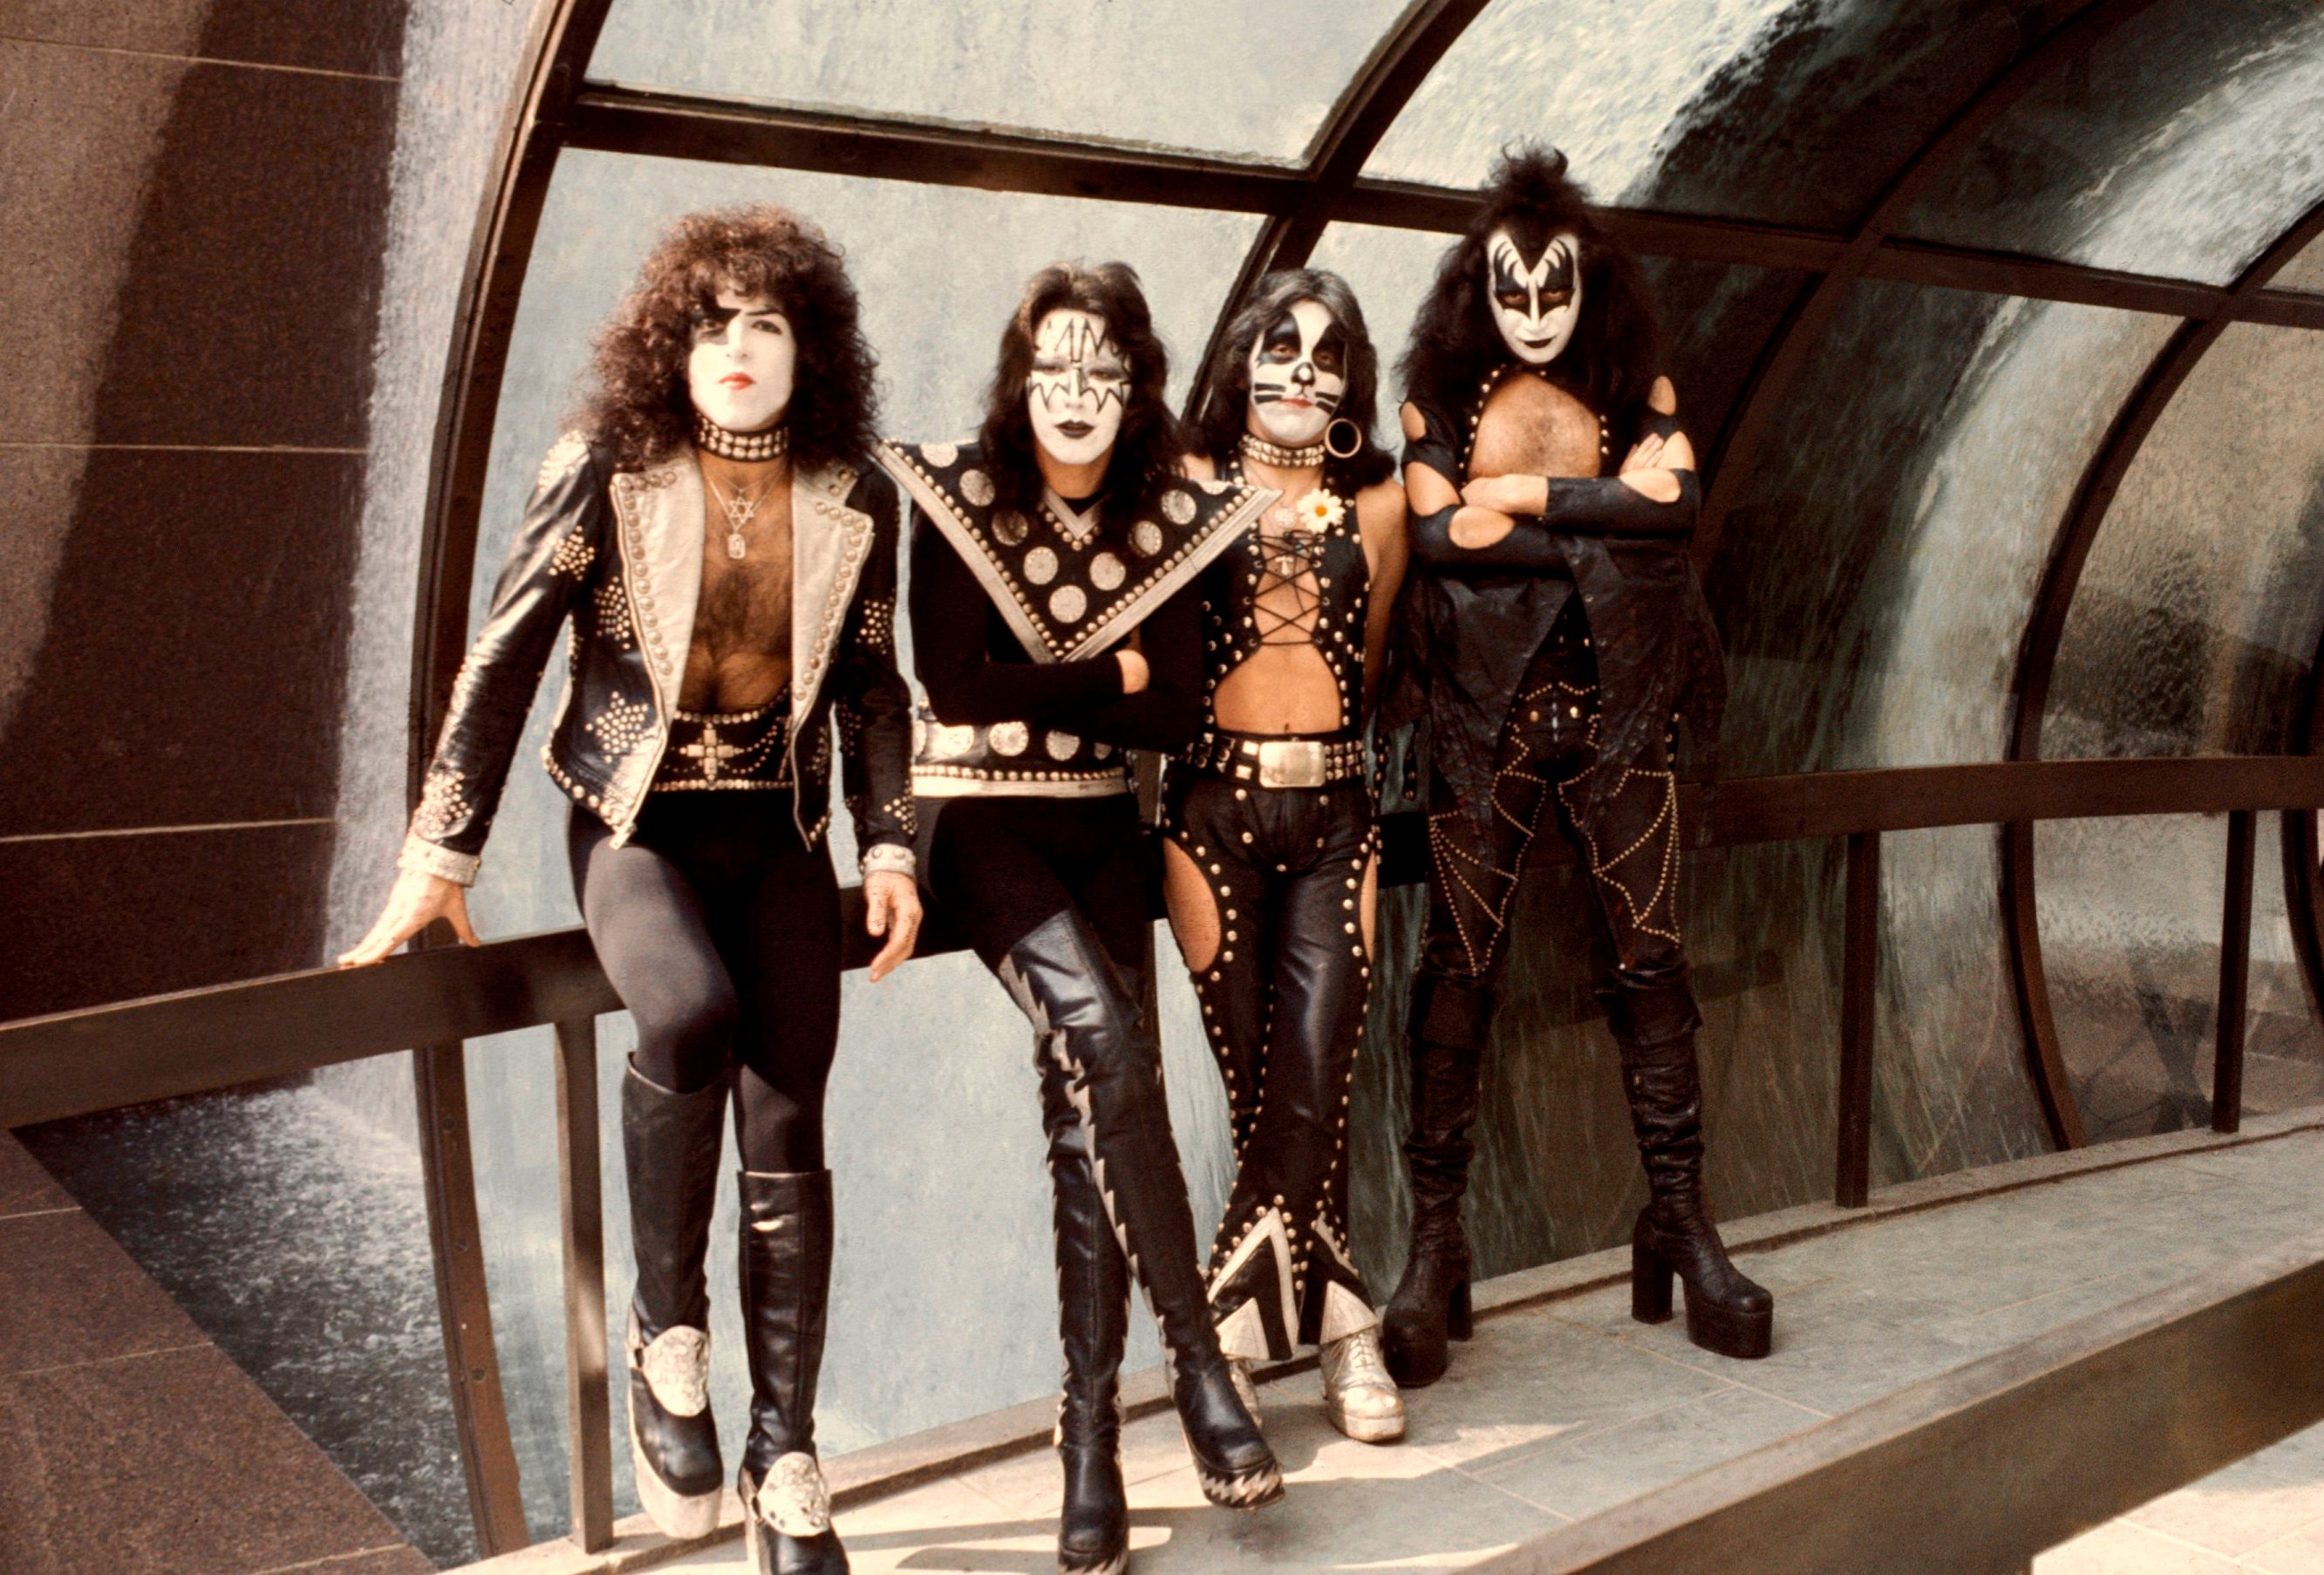 Kiss members Paul Stanley, Ace Frehley, Peter Criss, and Gene Simmons leaning on a railing